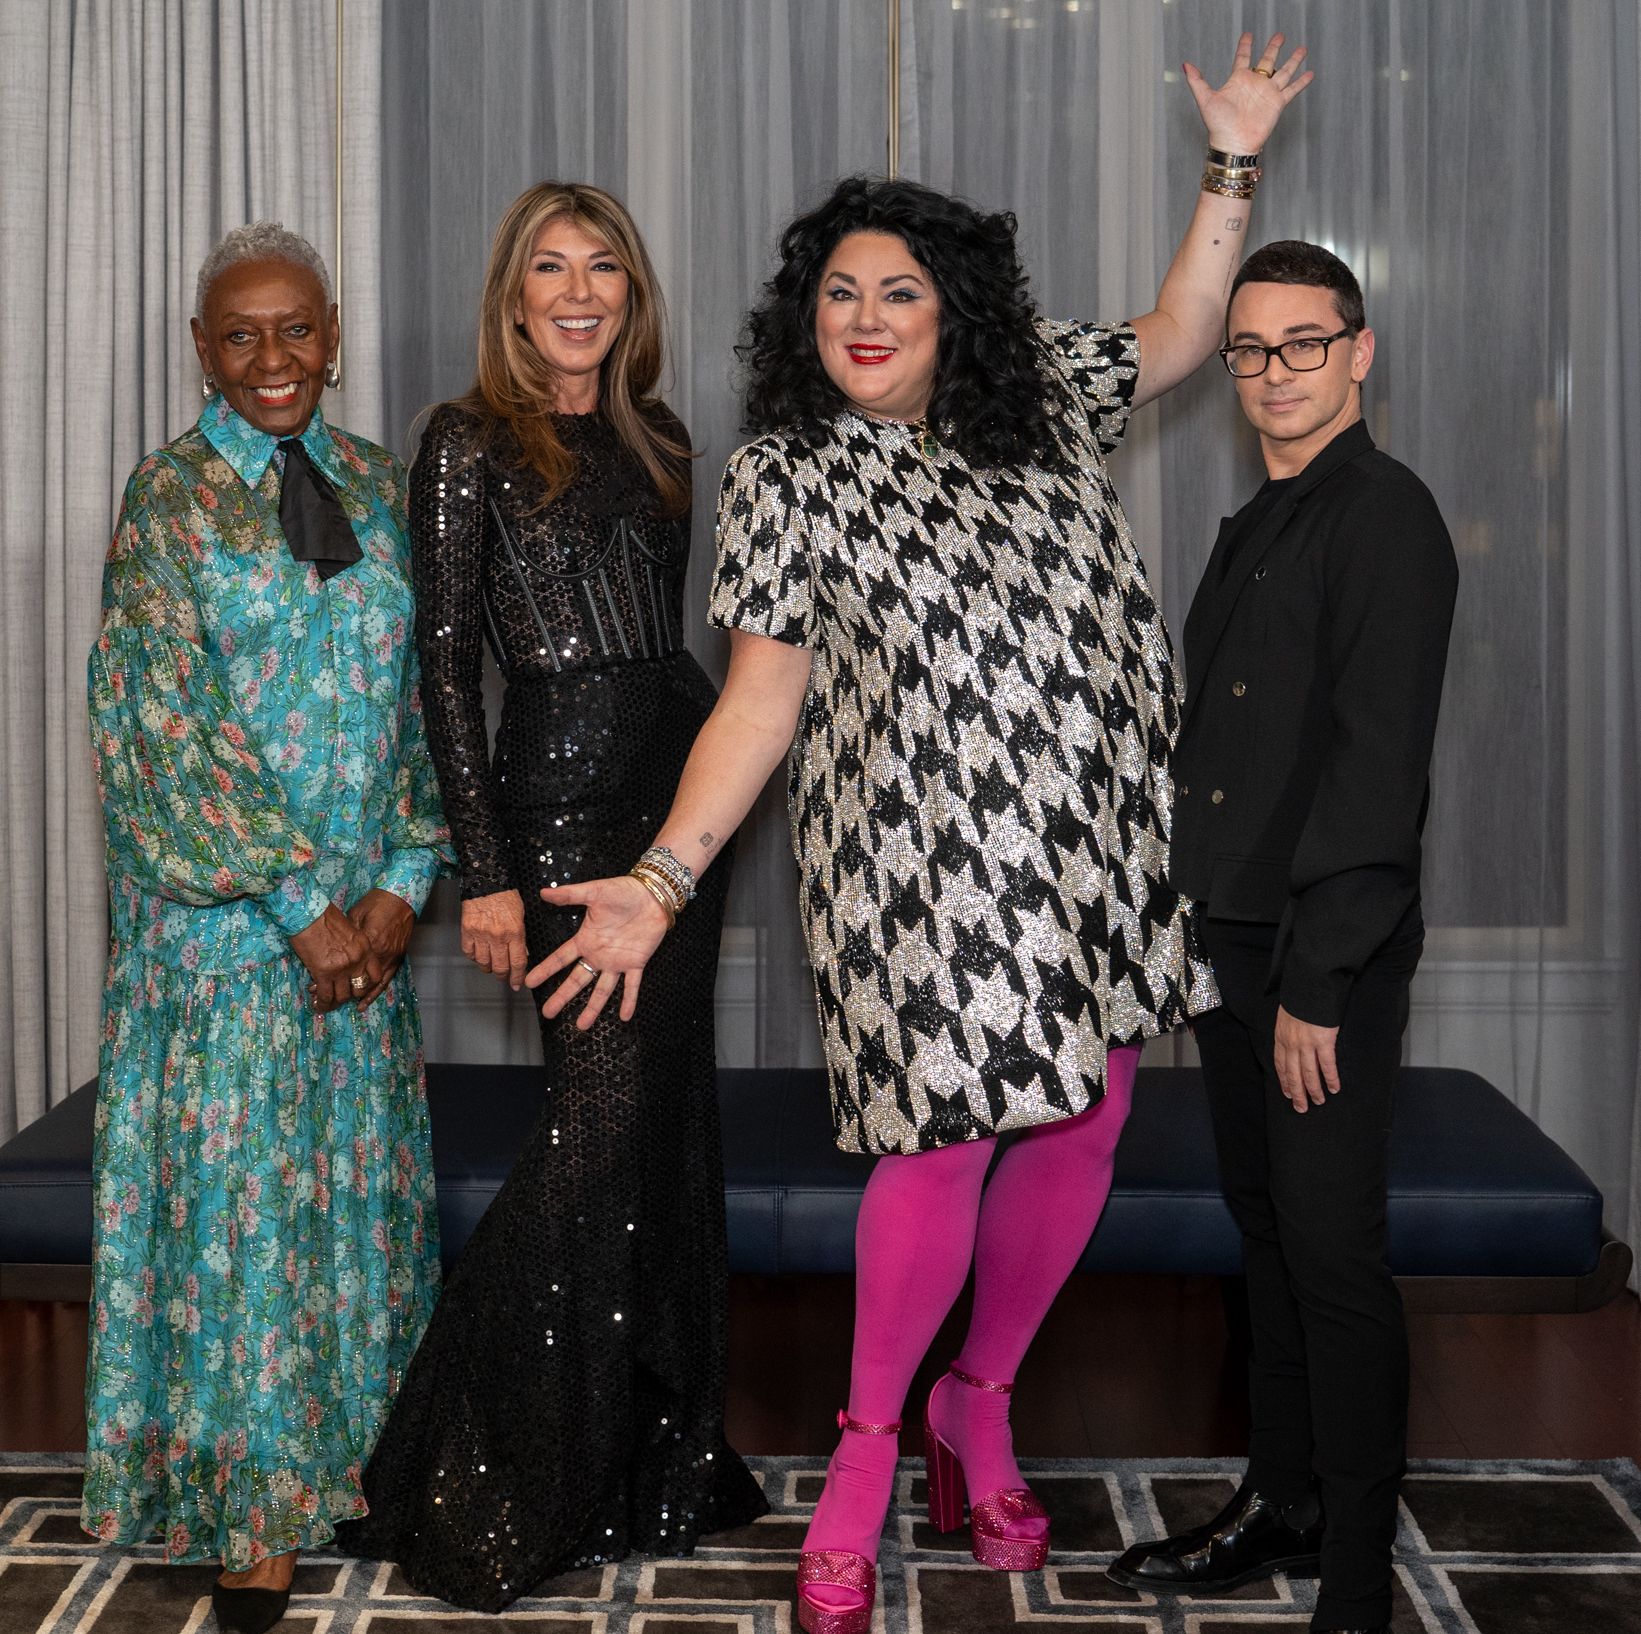 The event celebrated Garcia, Siriano, Bethann Hardison, and Ashley Longshore's feats in the industry.